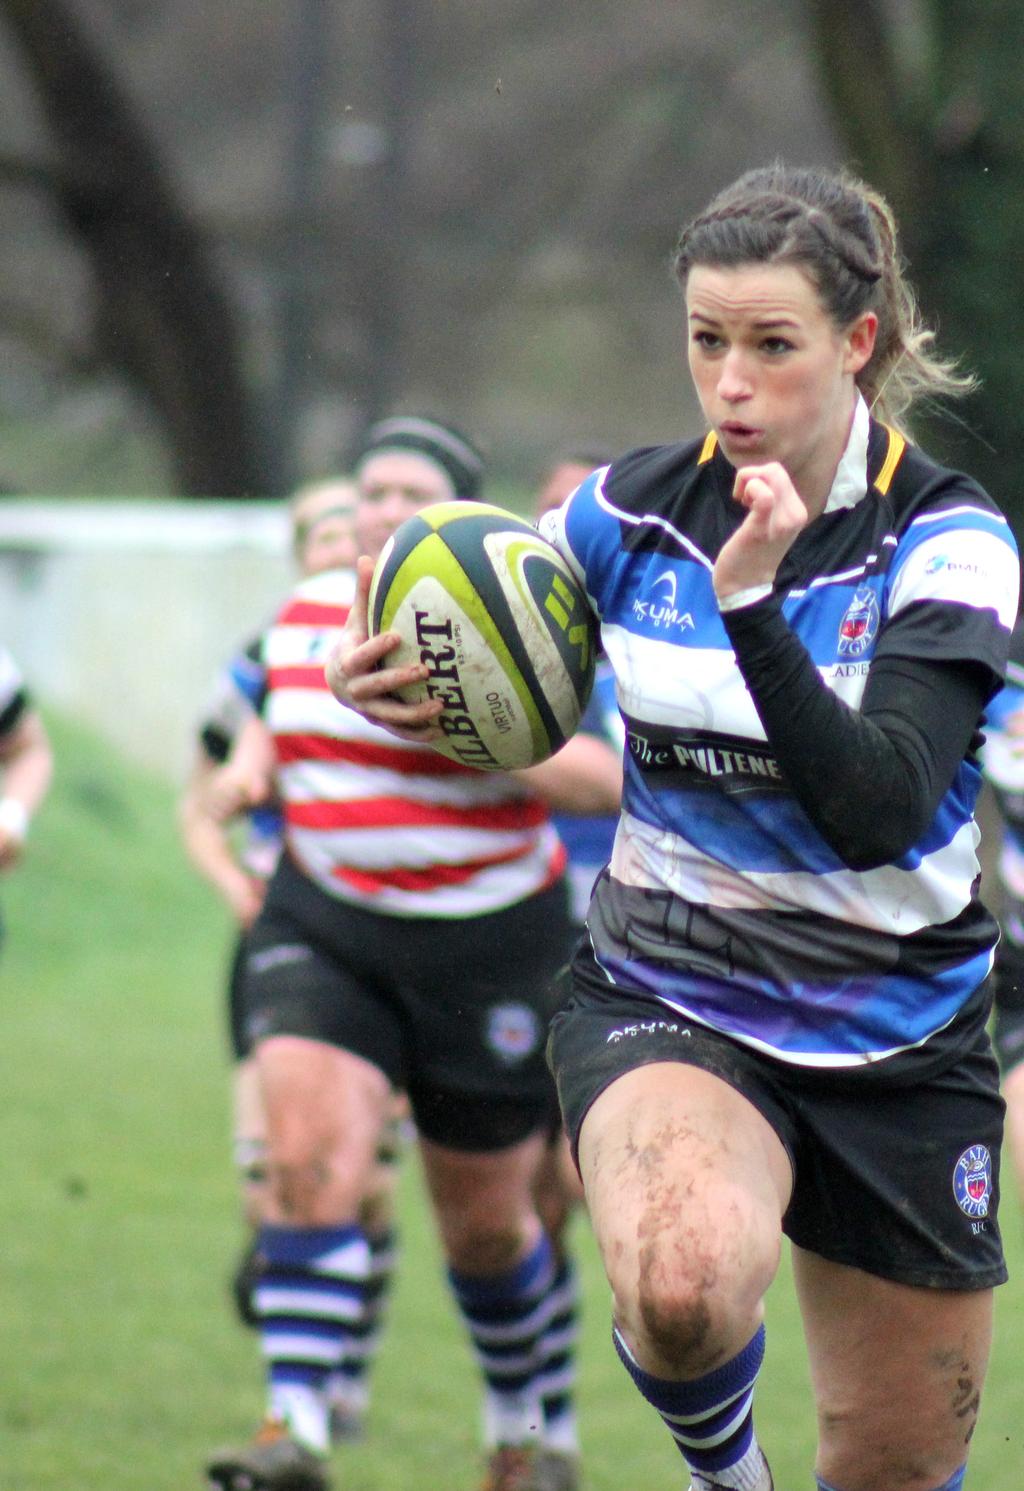 WOMENS RUGBY Women s rugby has never been so popular. Women s rugby is the largest up and coming women s sport in the UK.